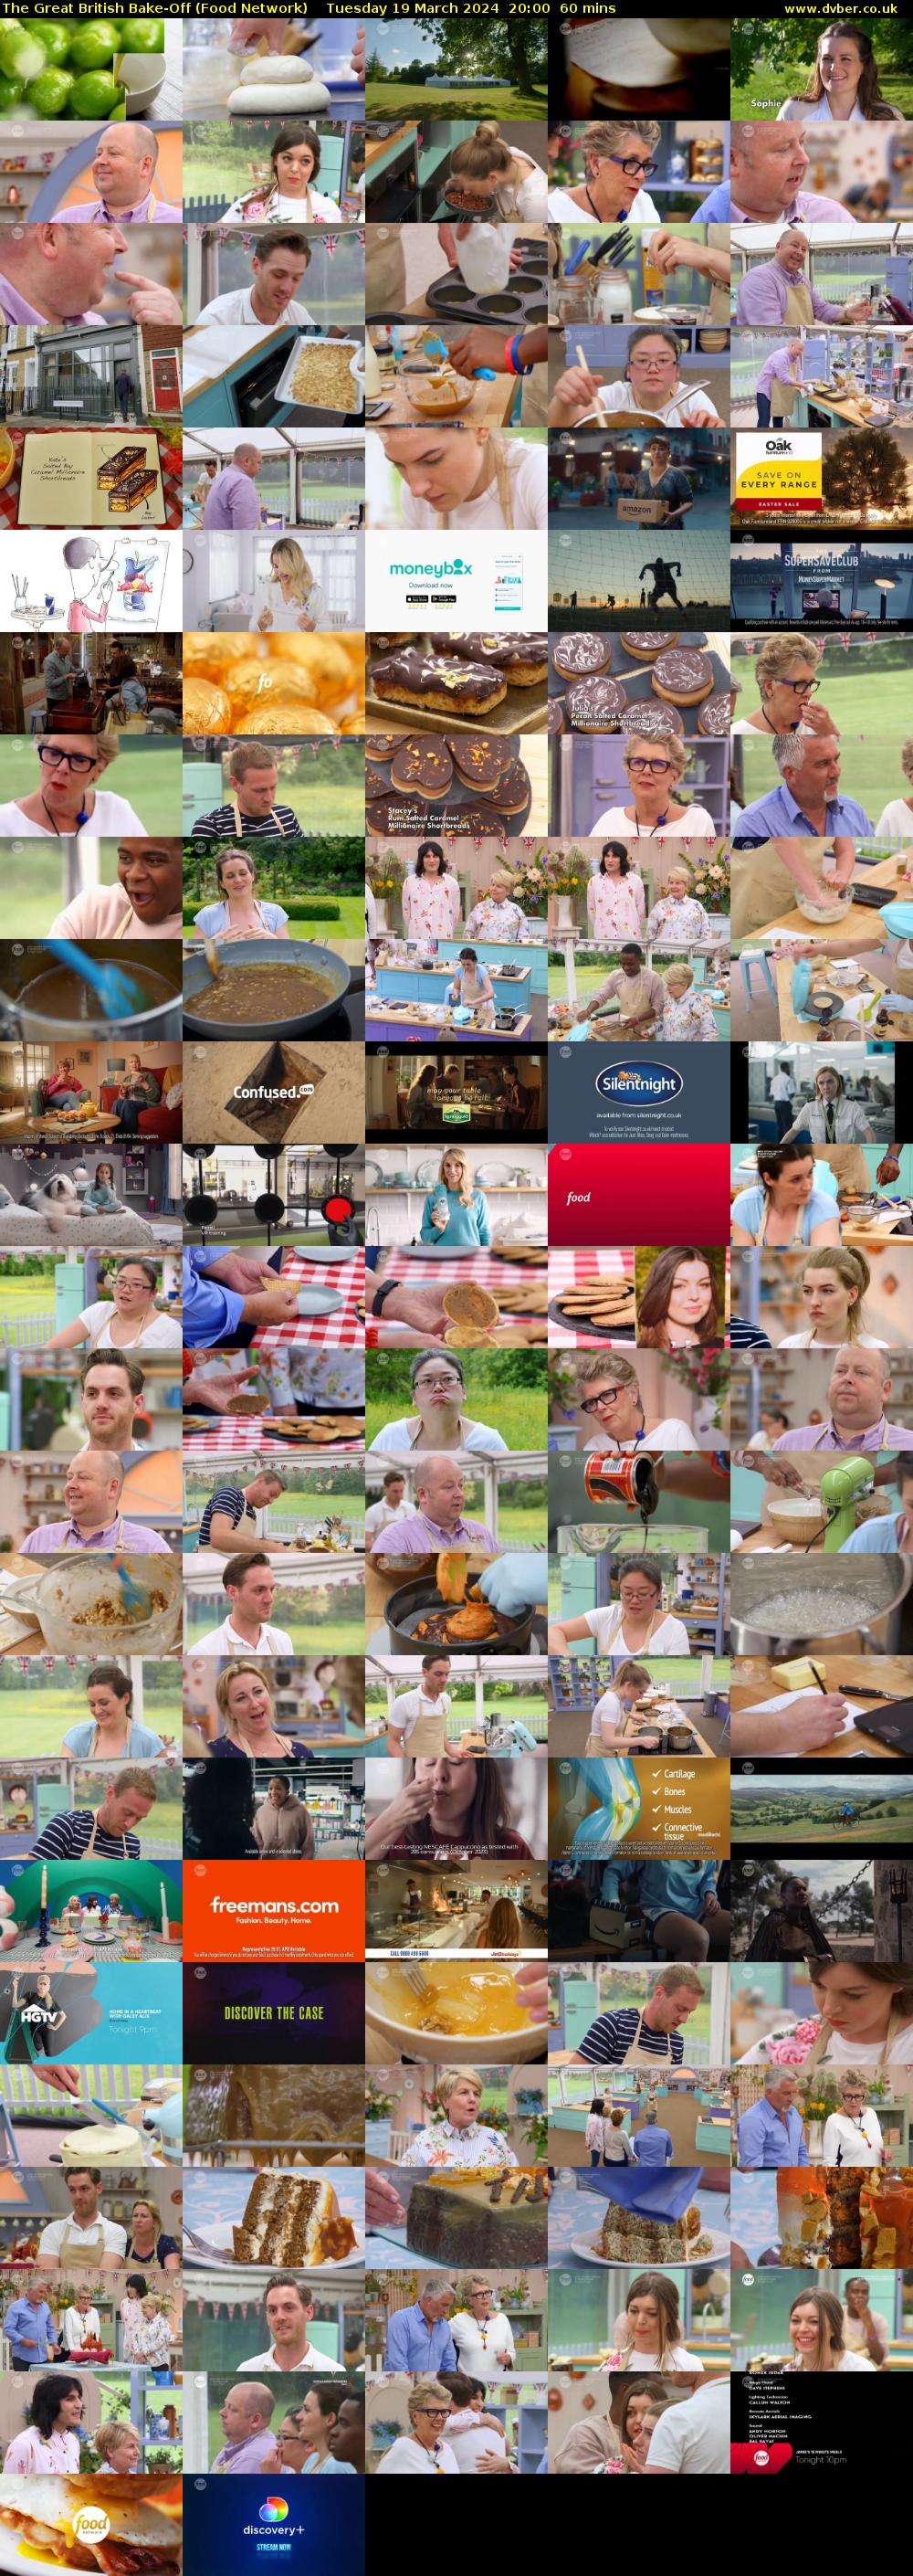 The Great British Bake-Off (Food Network) Tuesday 19 March 2024 20:00 - 21:00